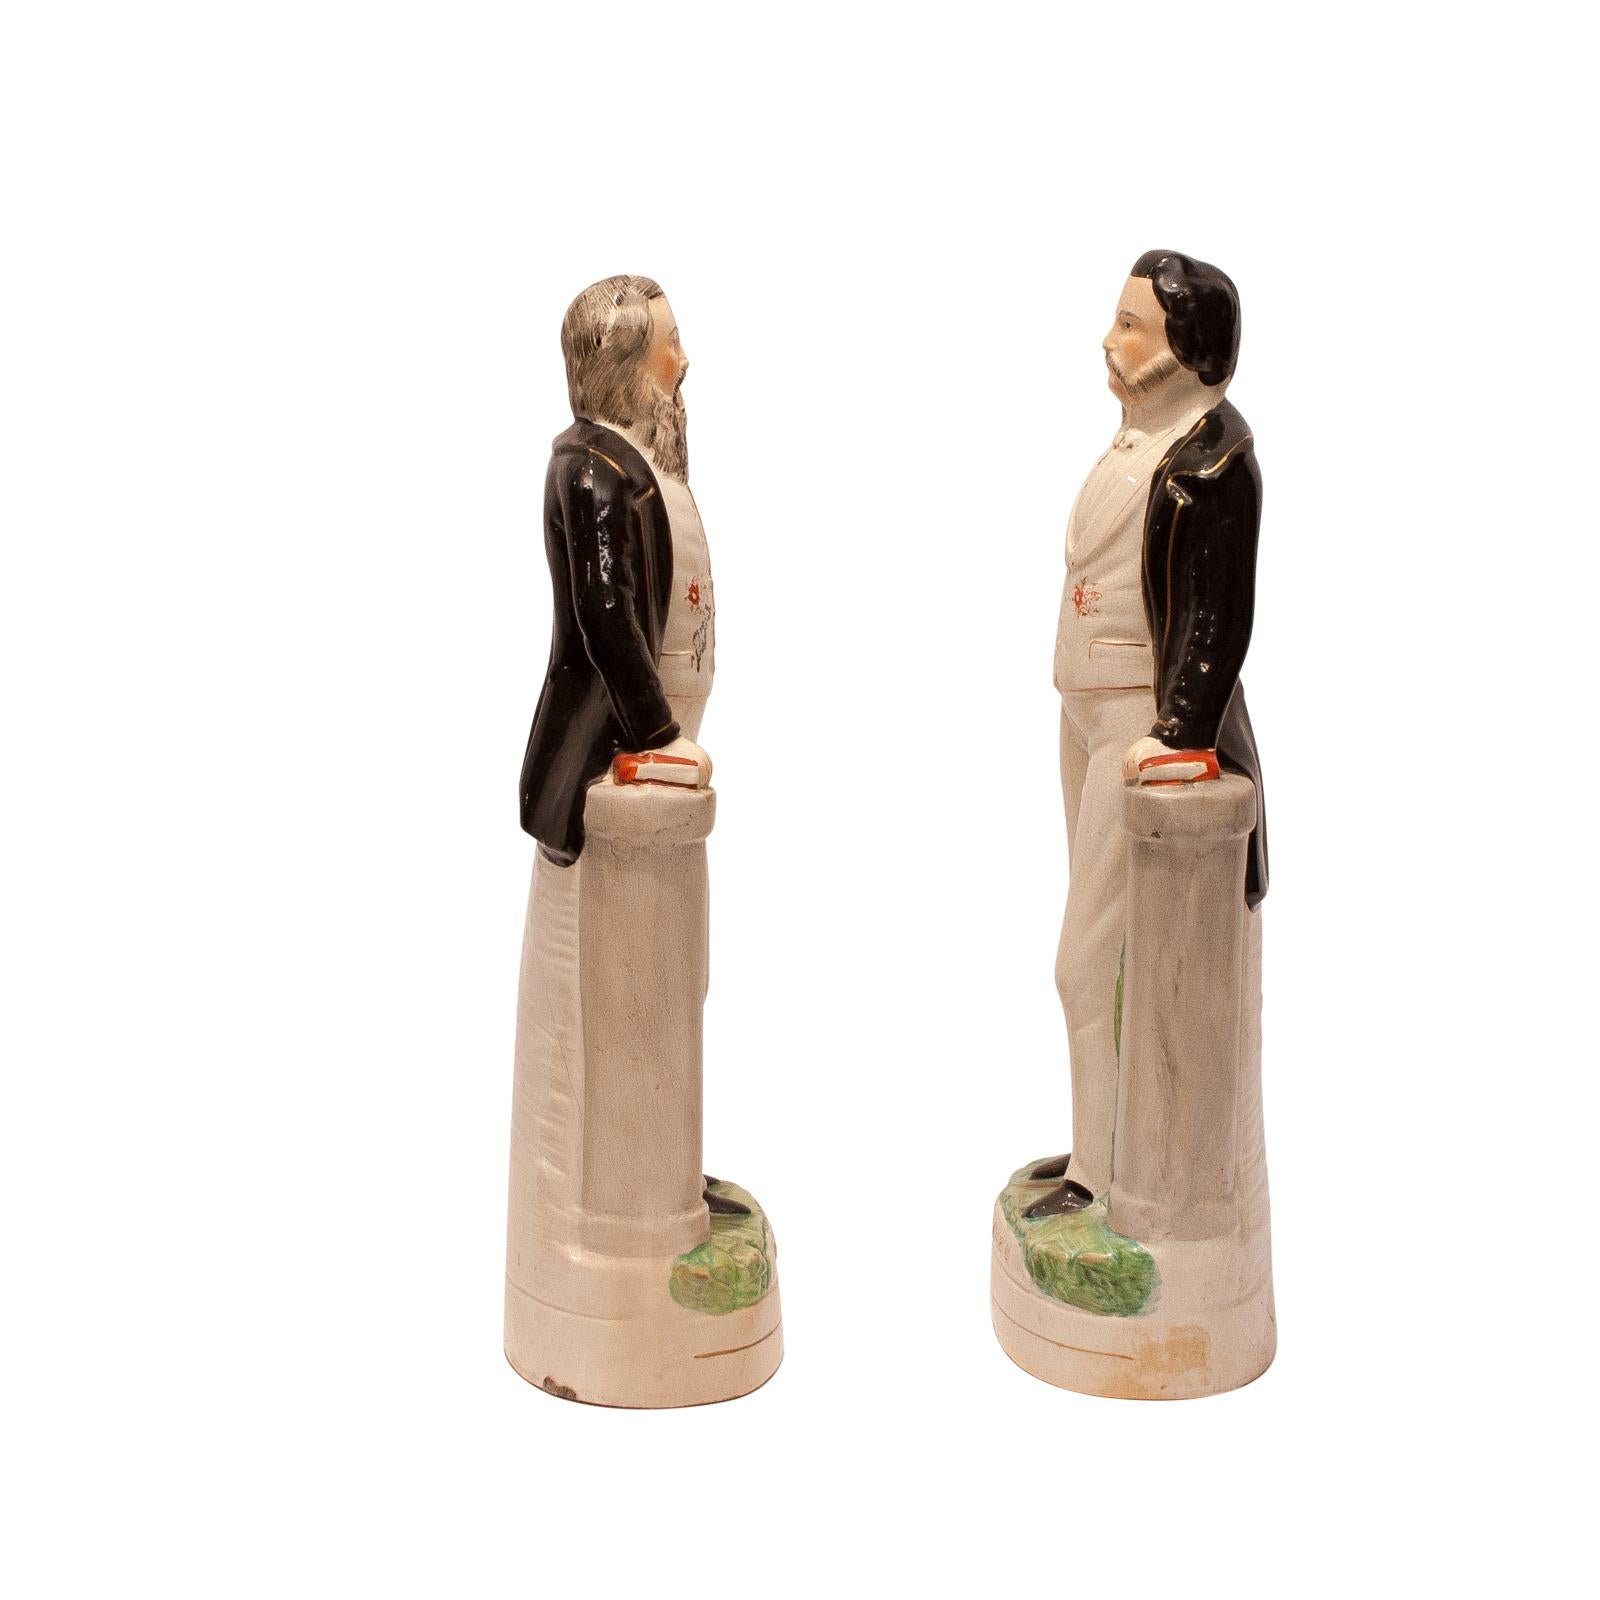 A pair of large English Staffordshire figures of Moody and Sankey, circa 1860. The measurements are for Moody, Sankey measures 16.75